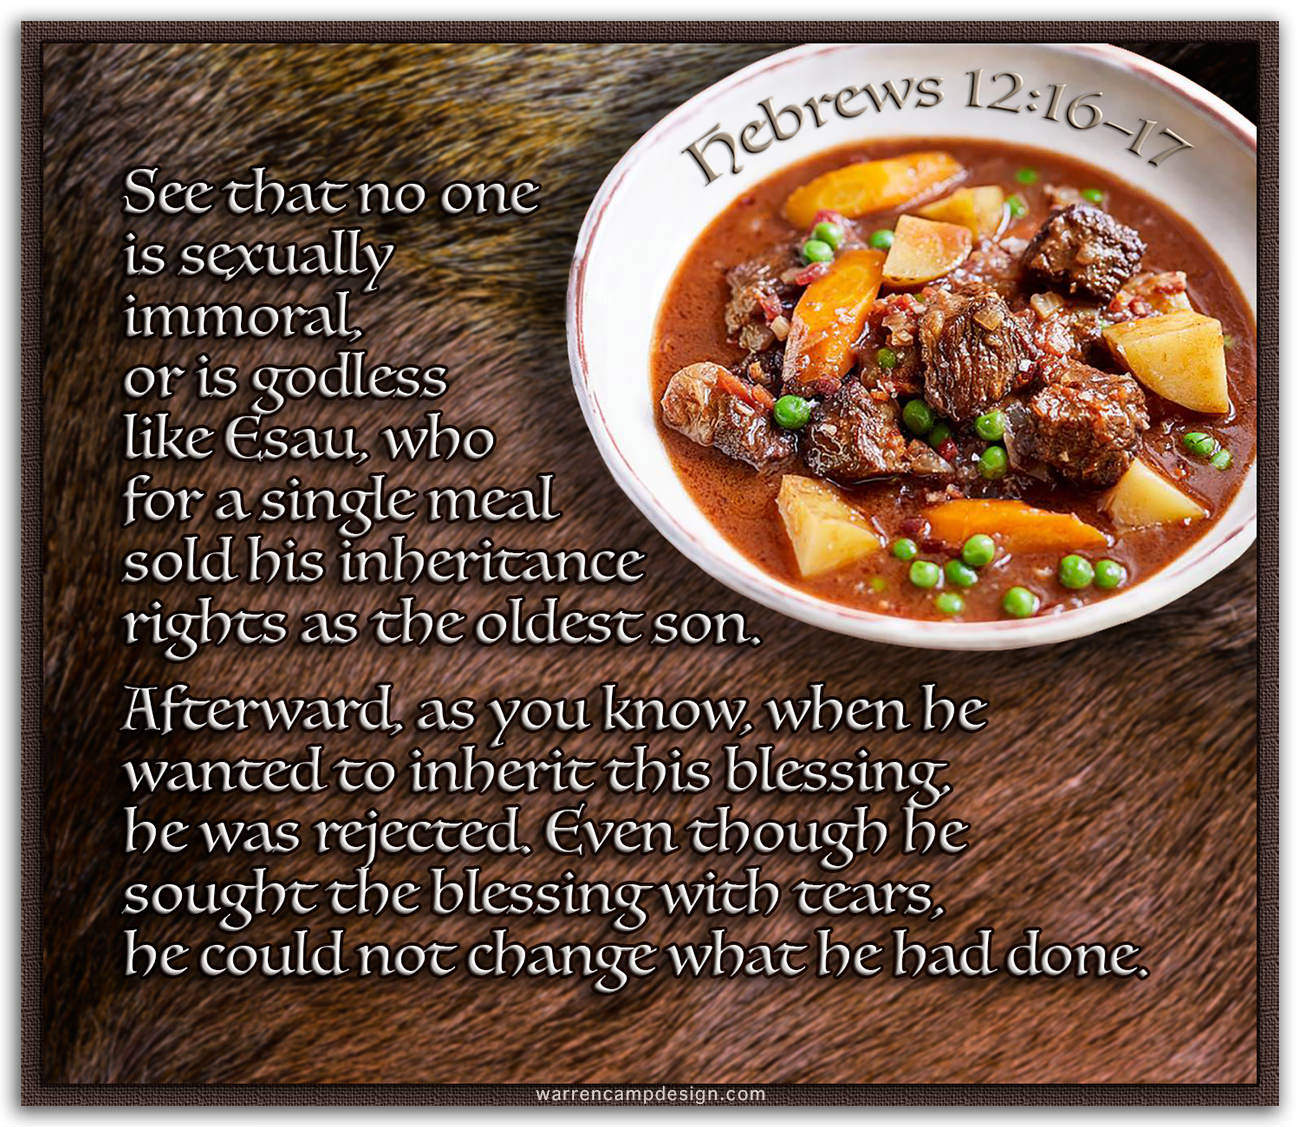 Scripture picture of Hebrews 12:16-17, emphasizing how Esau was a man who forsook eternal blessings for momentary pleasure